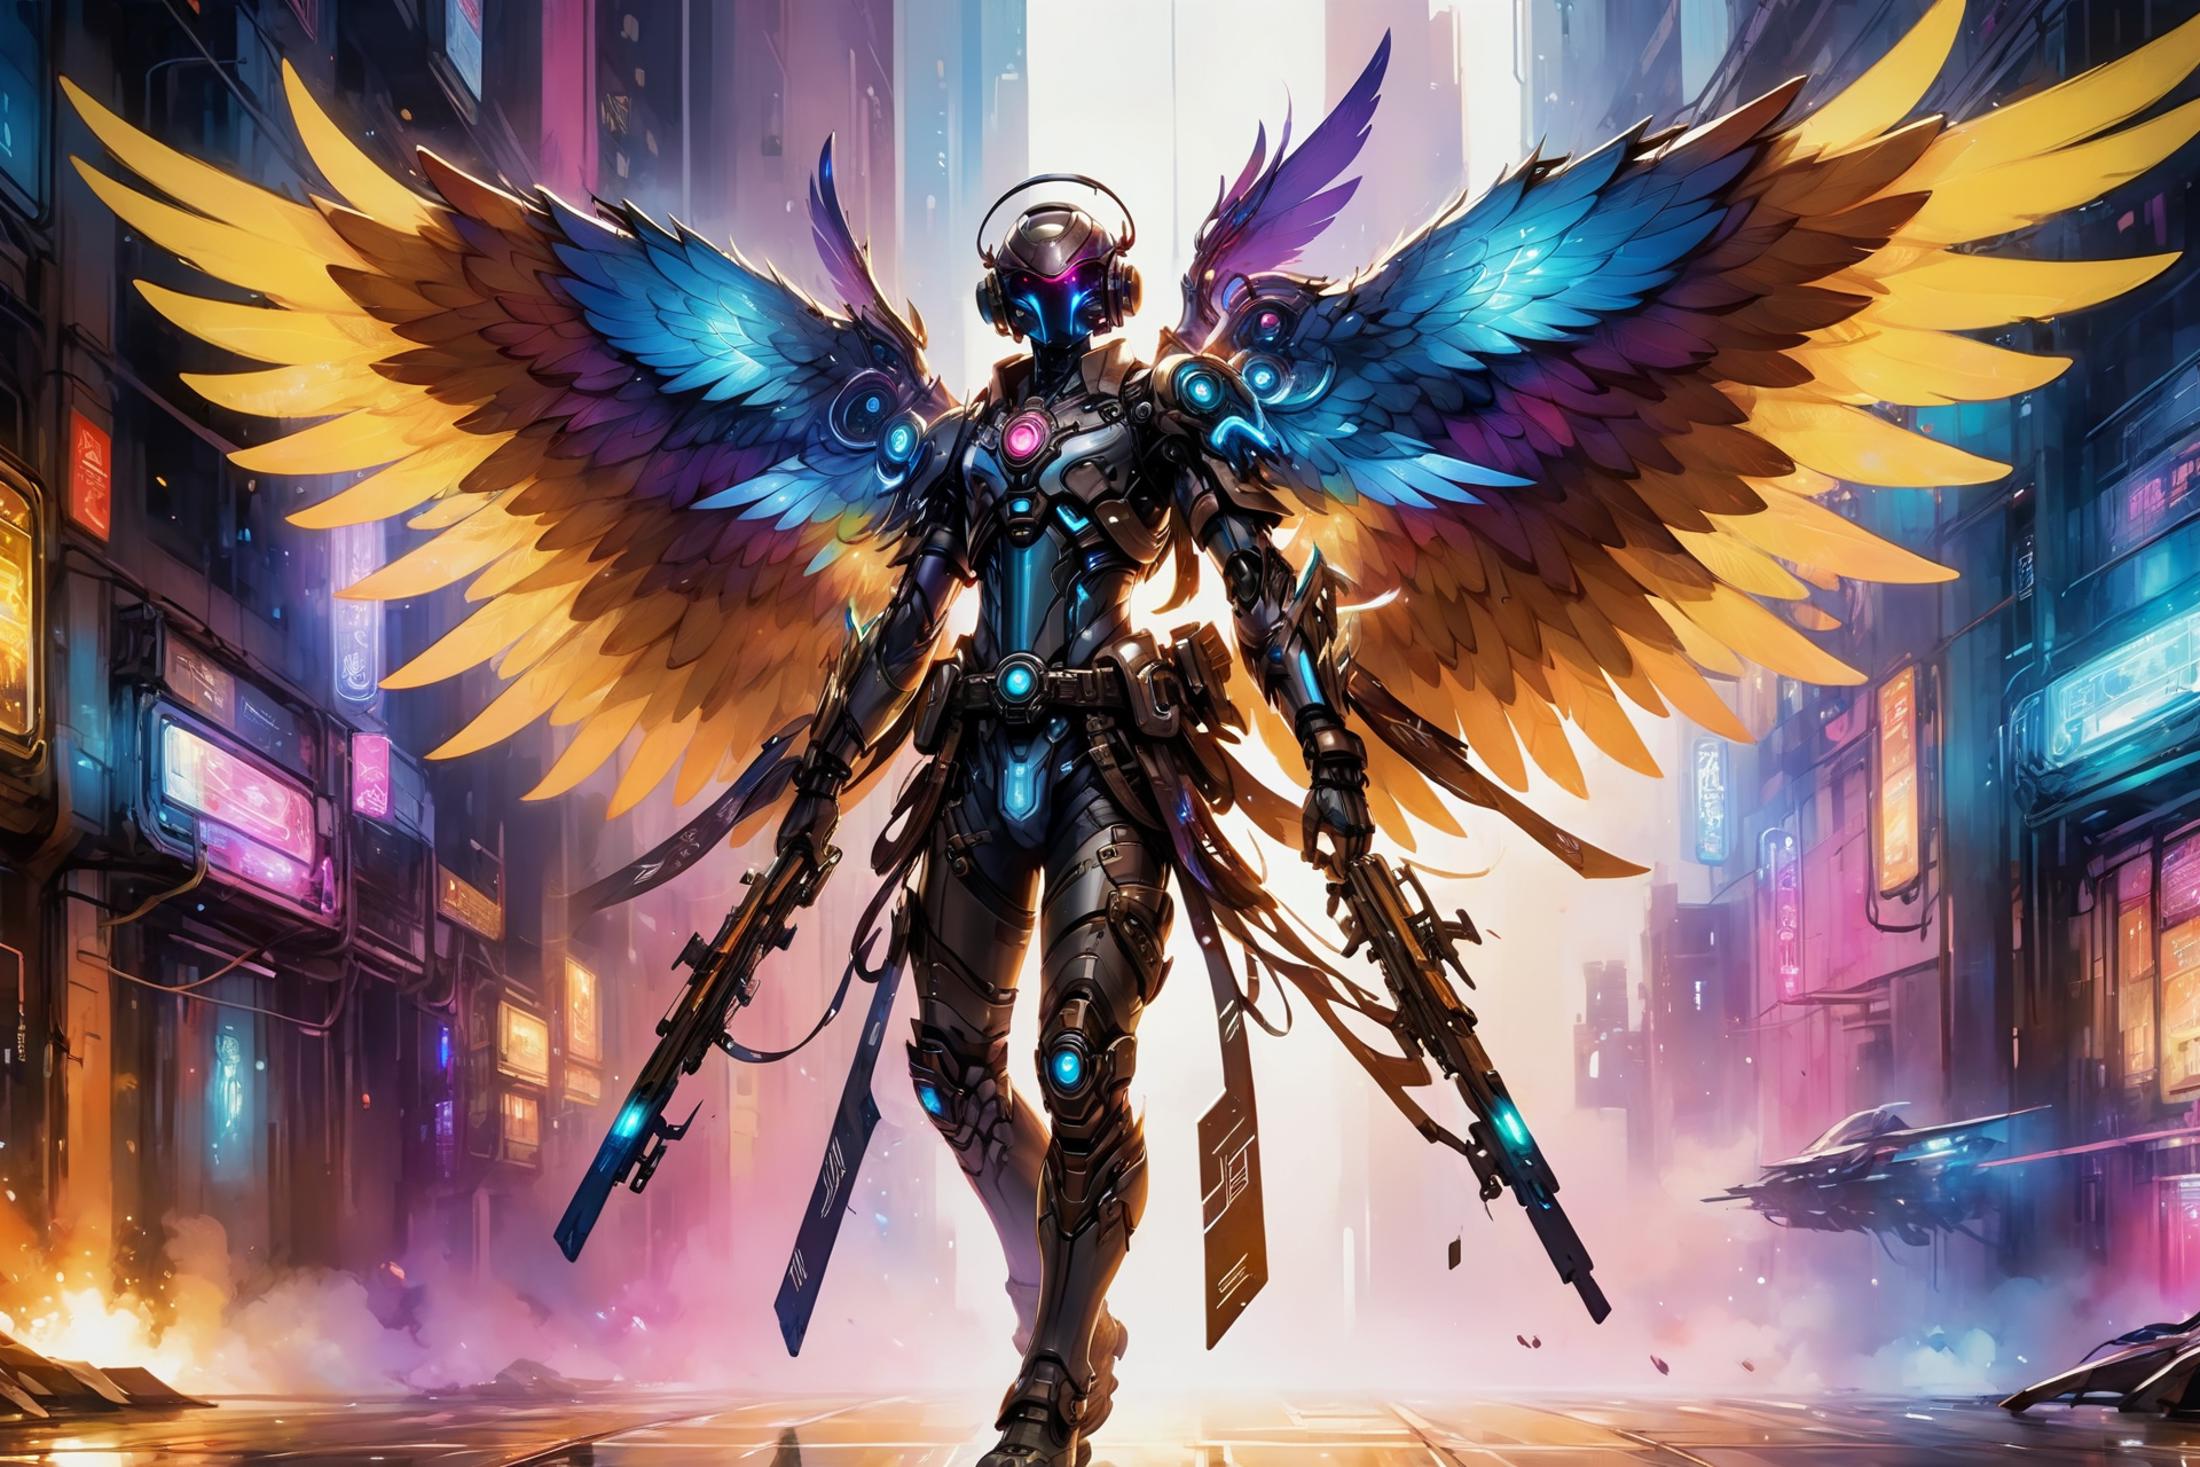 Futuristic Robot with Wings and Guns in a Cityscape